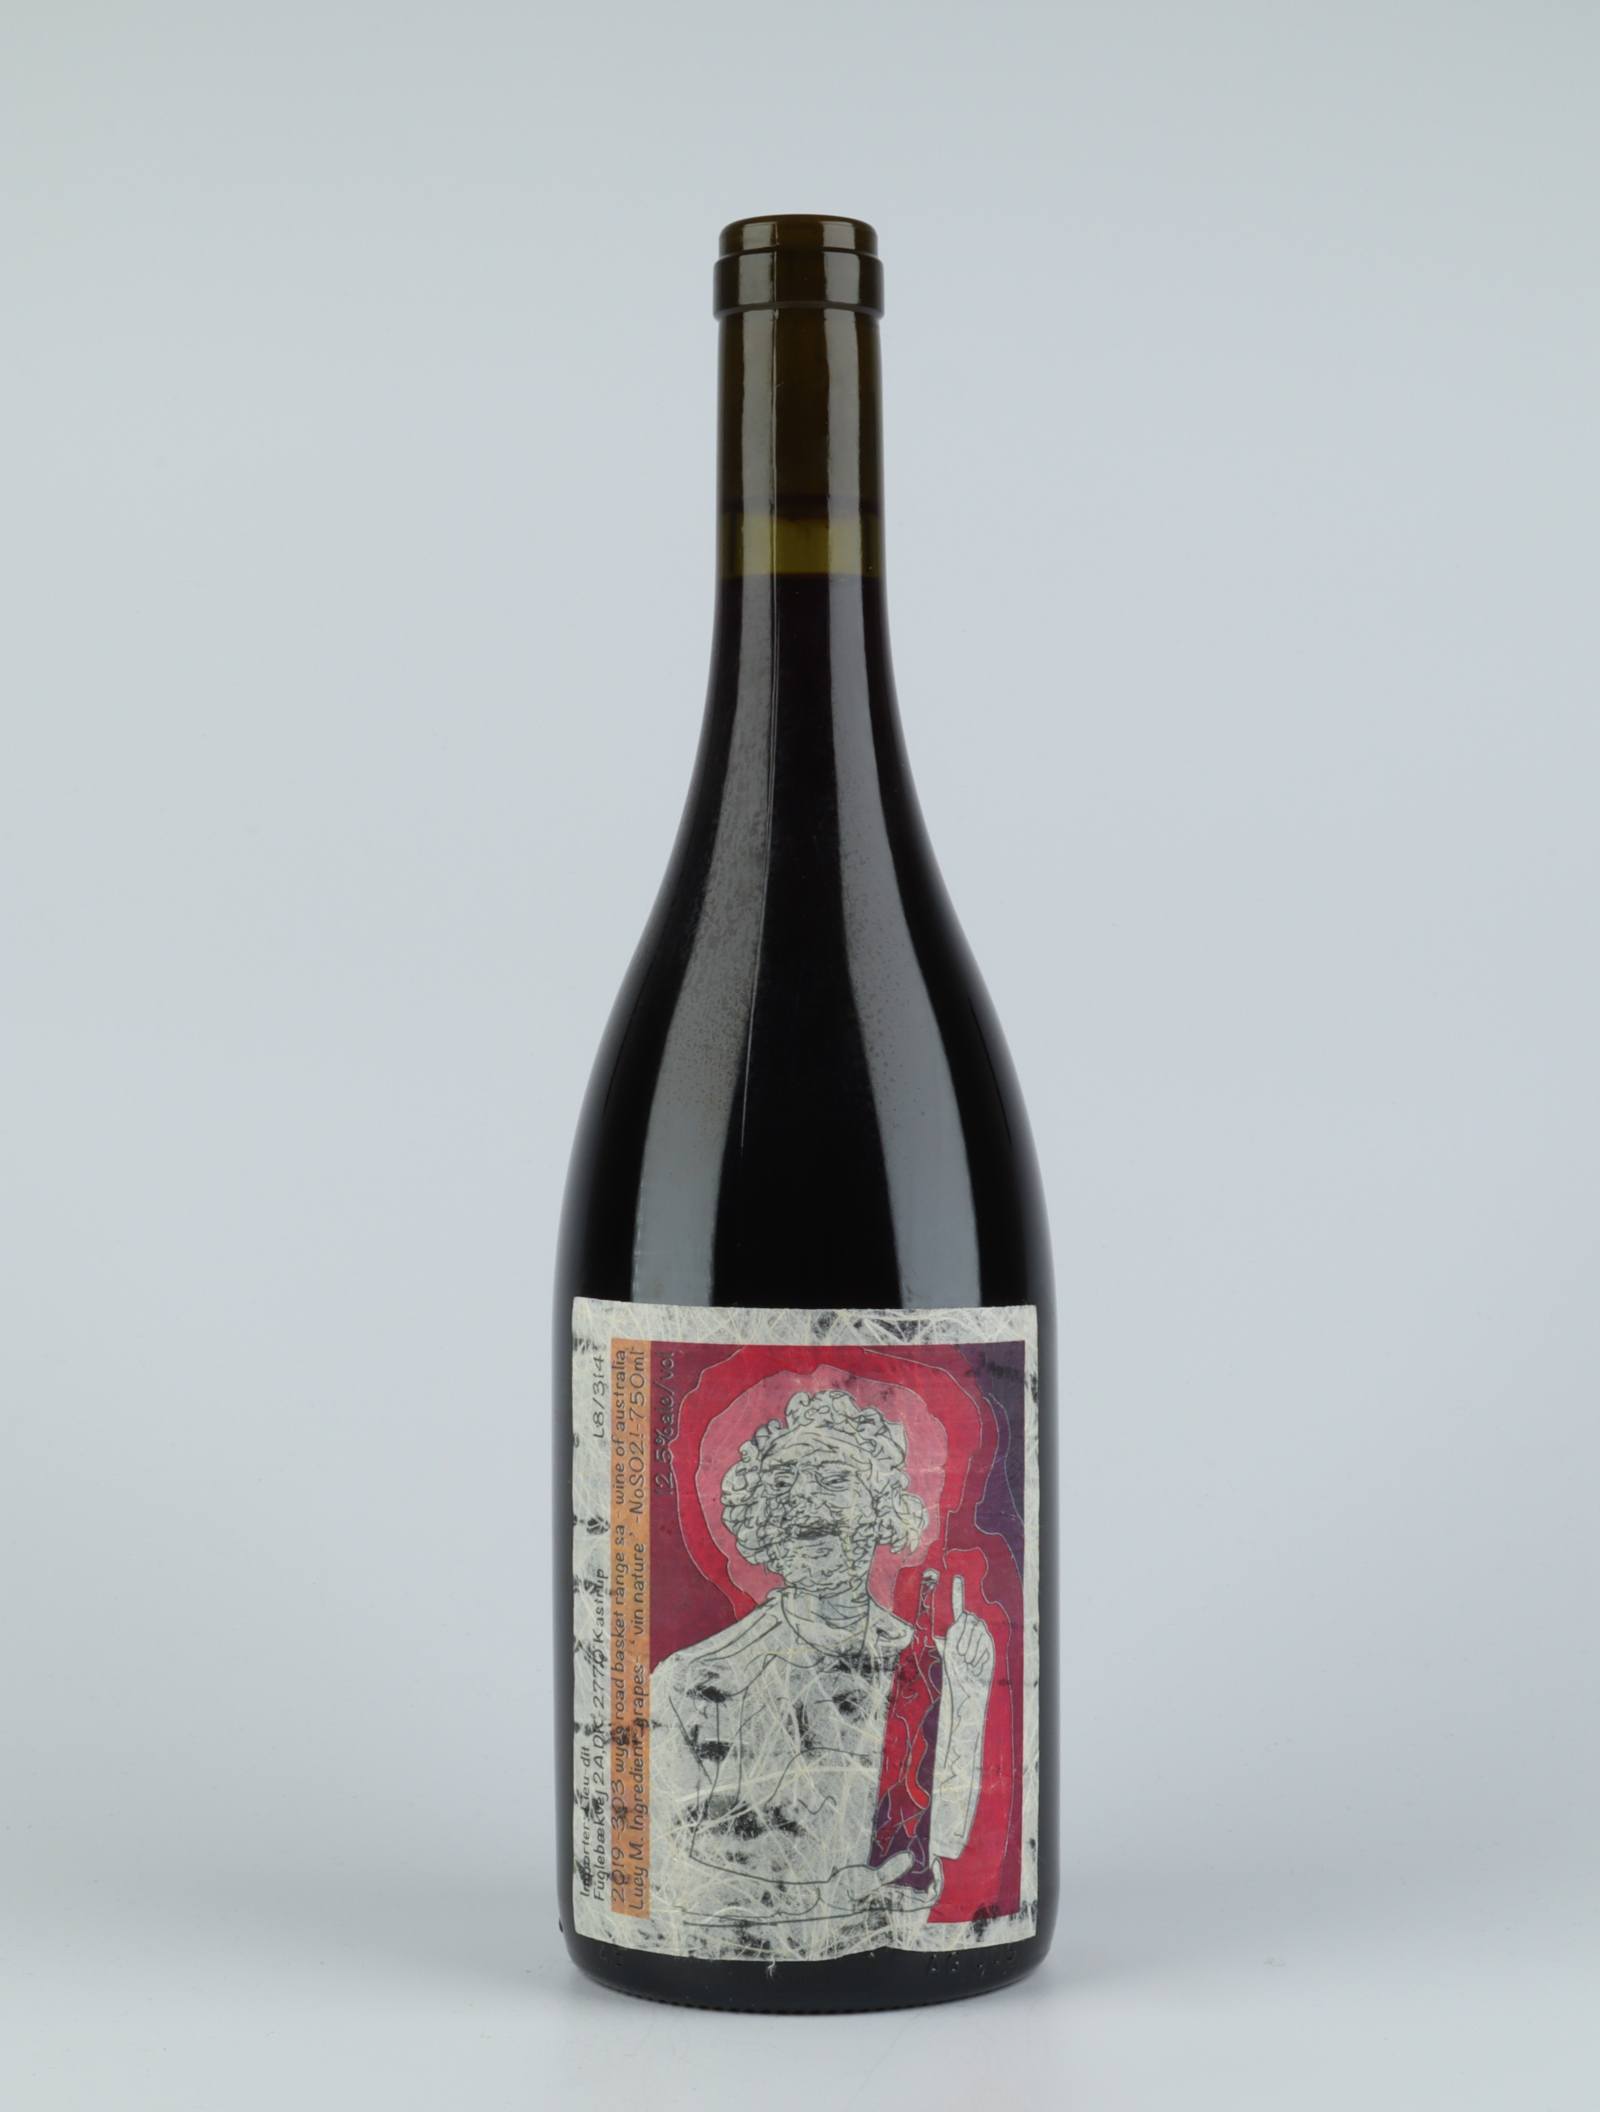 A bottle 2019 Sangiovese Stupefacente Red wine from Lucy Margaux, Adelaide Hills in 